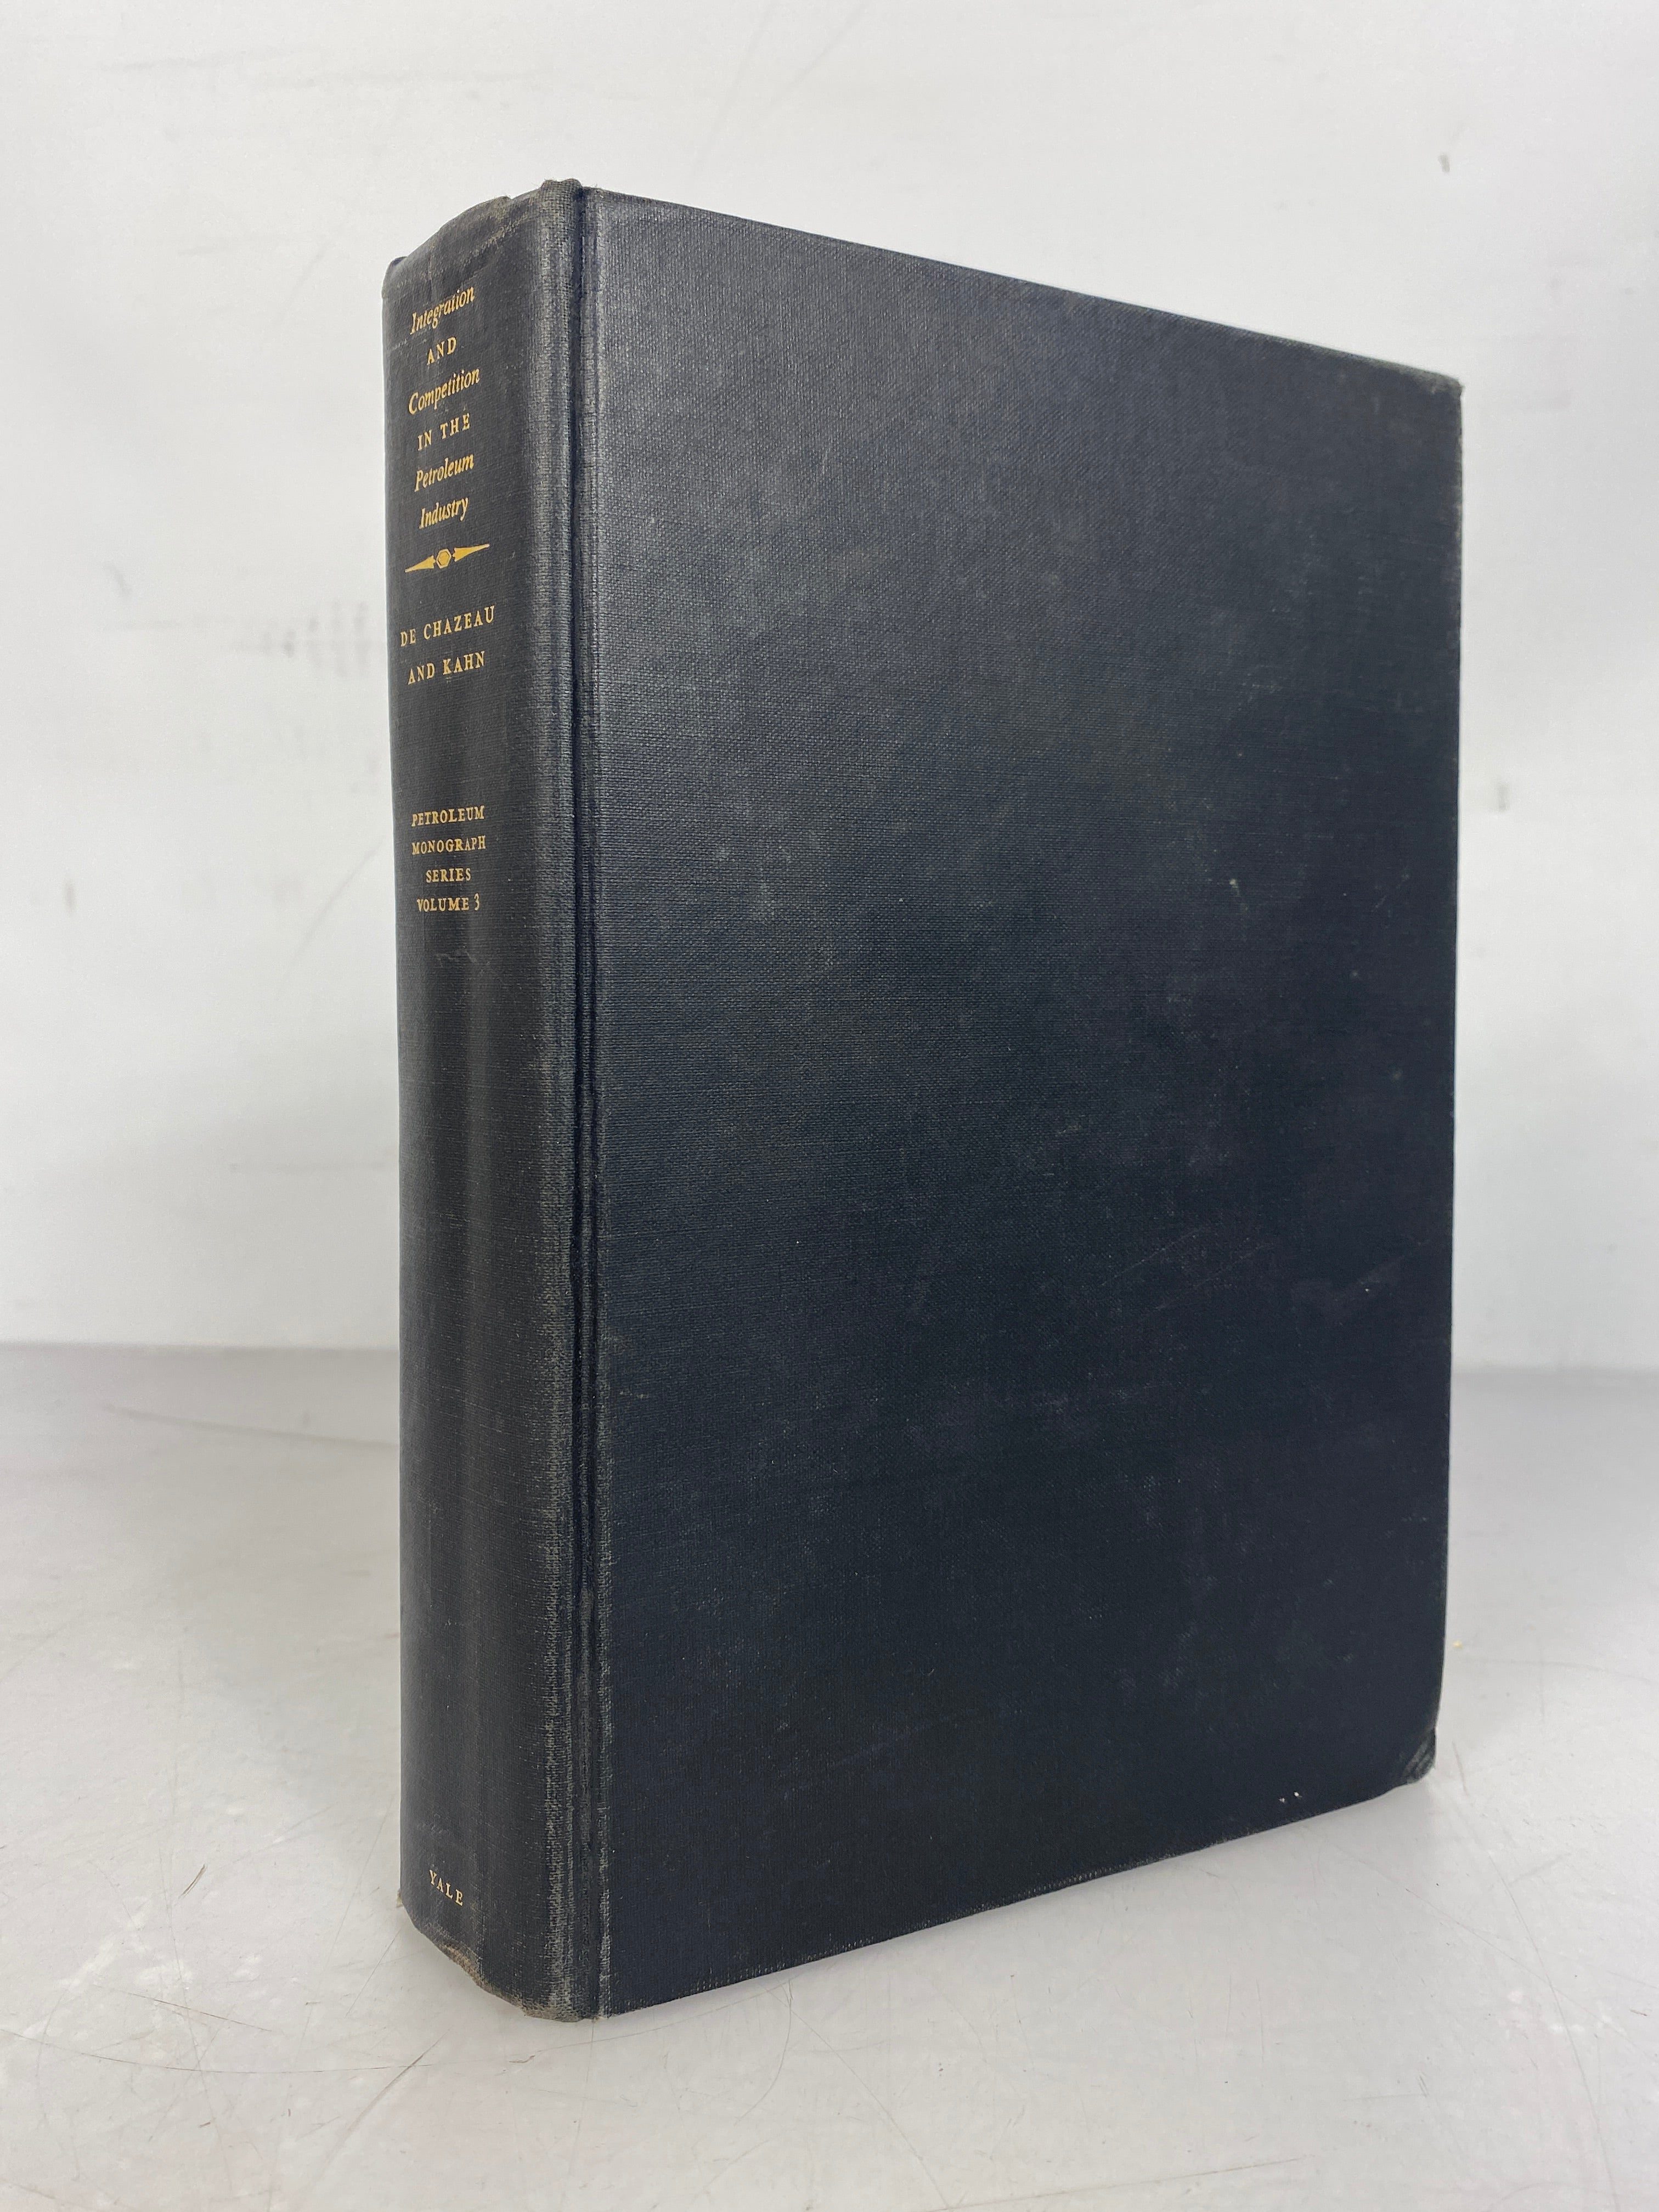 Integration and Competition in the Petroleum Industry by de Chazeau and Kahn 1959 HC